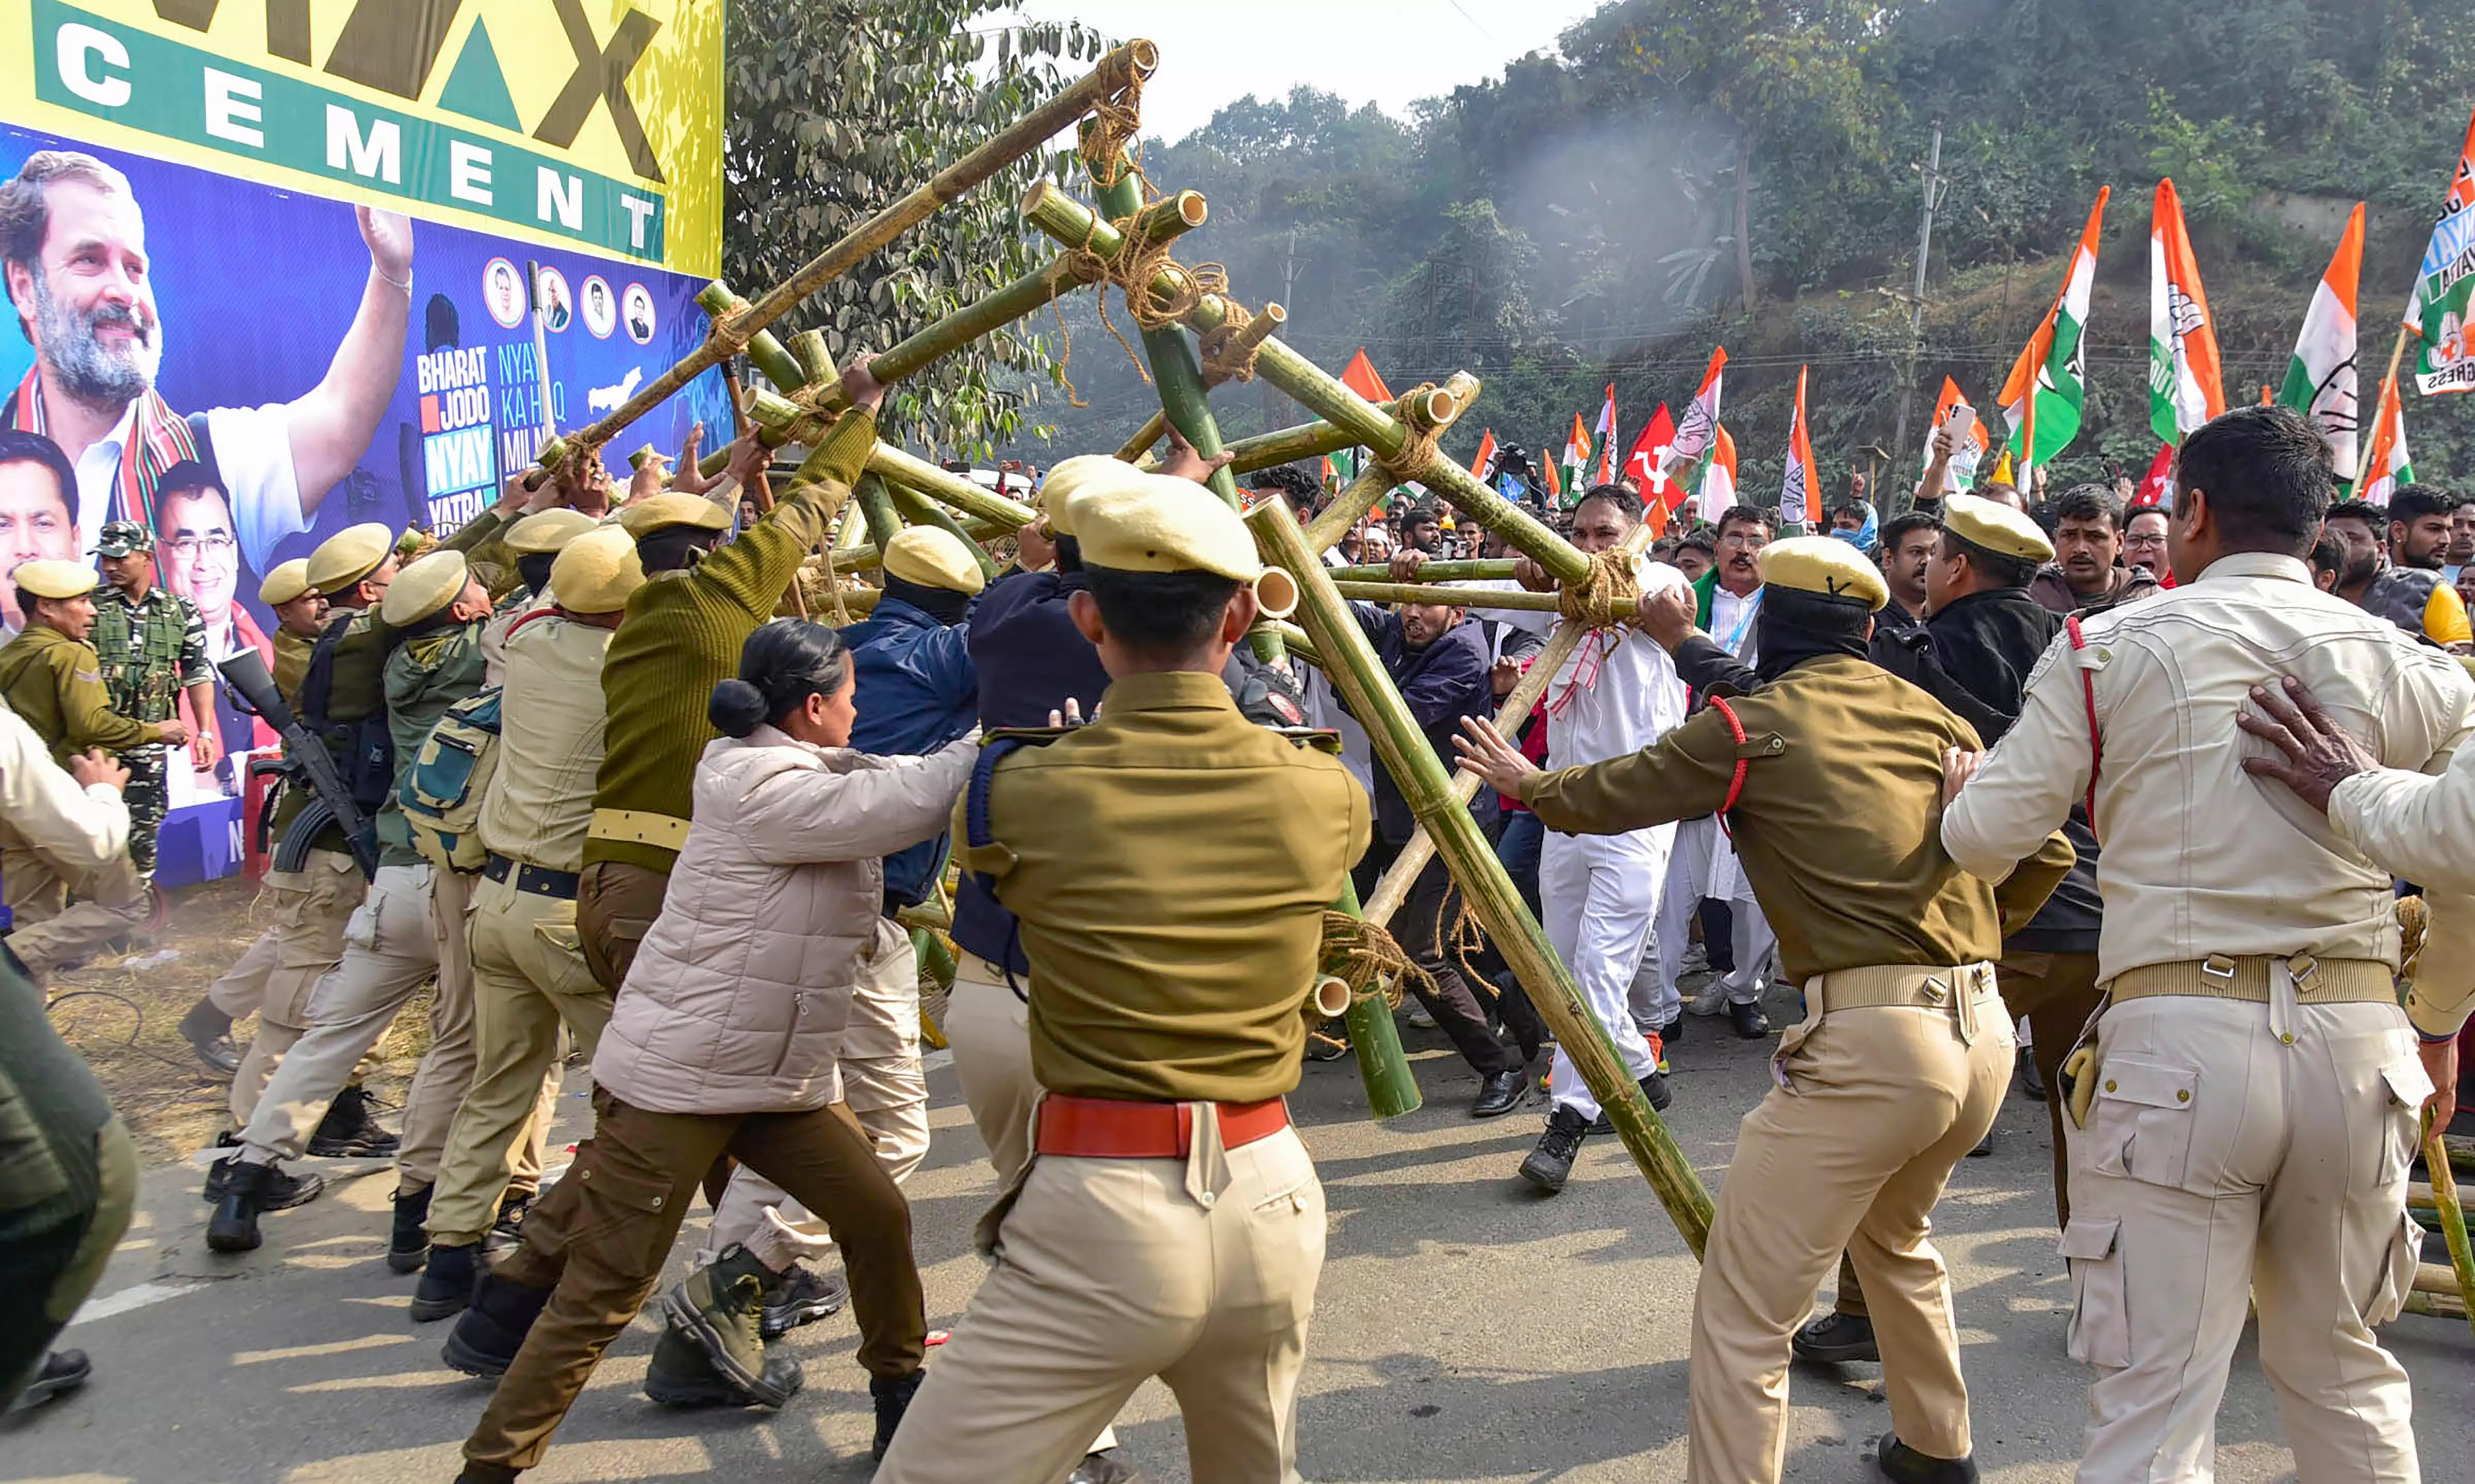 Congress workers clash with police as Bharat Jodo Nyay Yatra denied entry into Guwahati